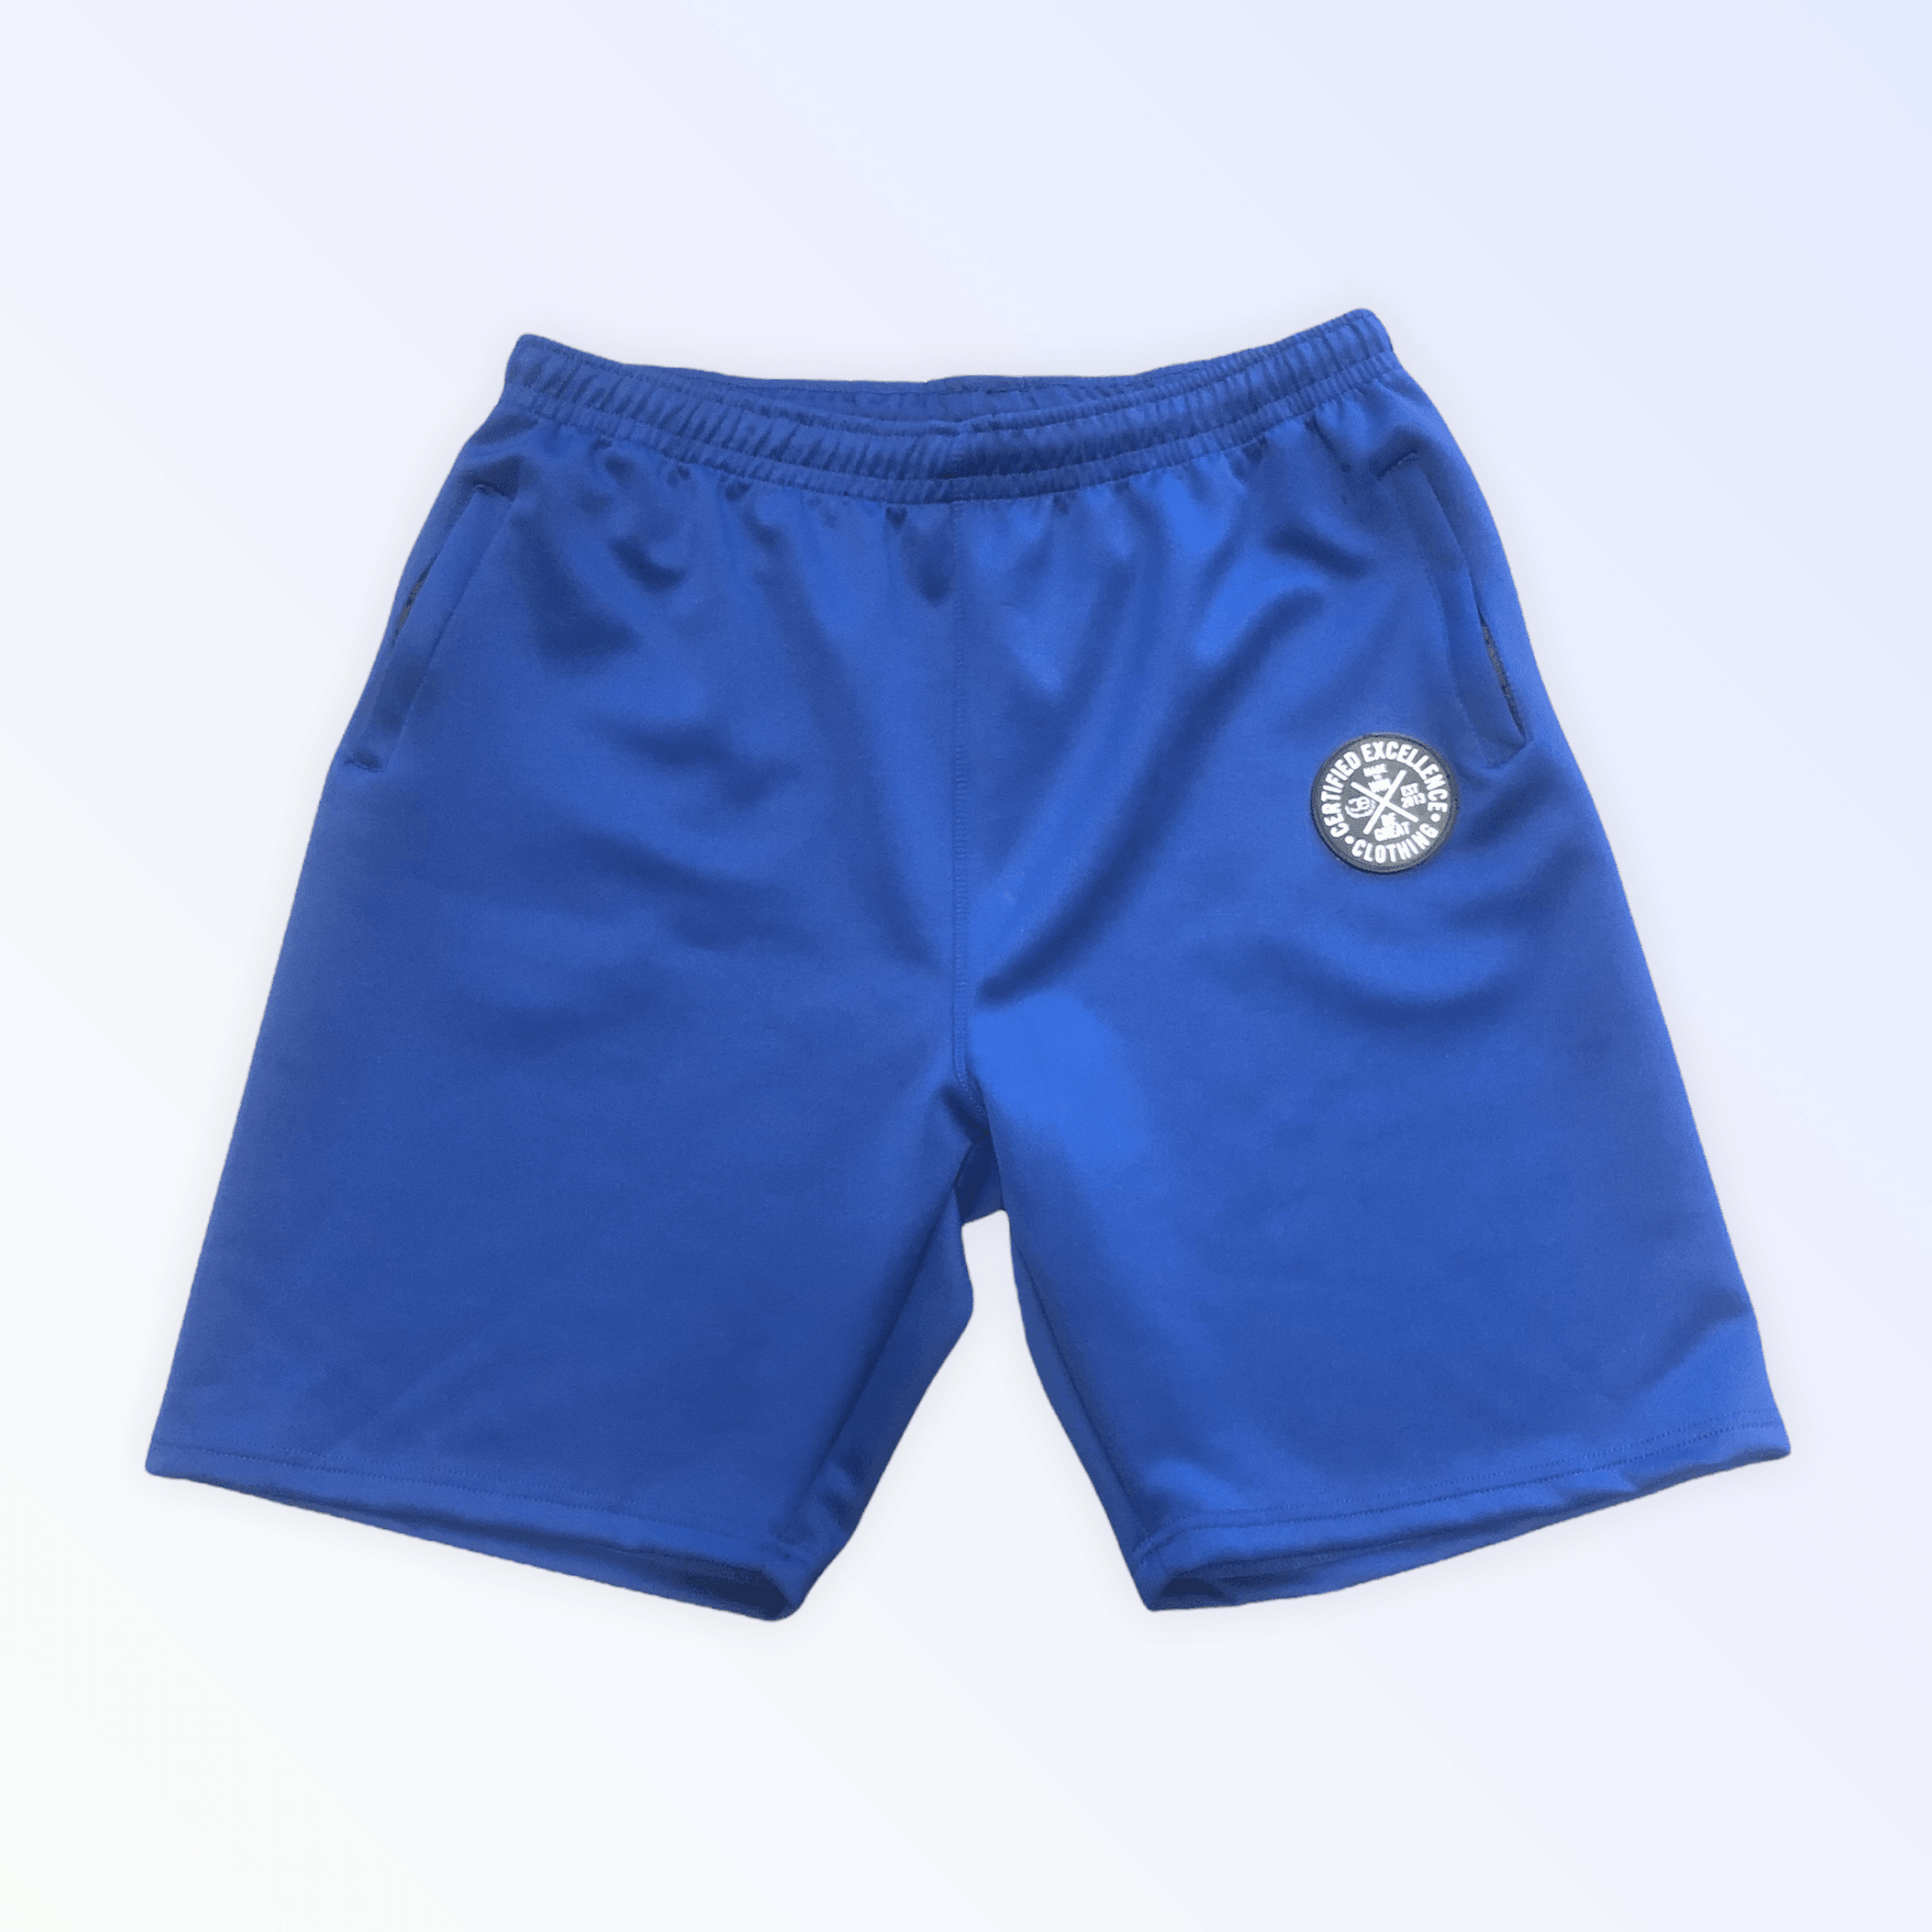 “CE” unisex Royal Blue Shorts - Certified Excellence Clothing